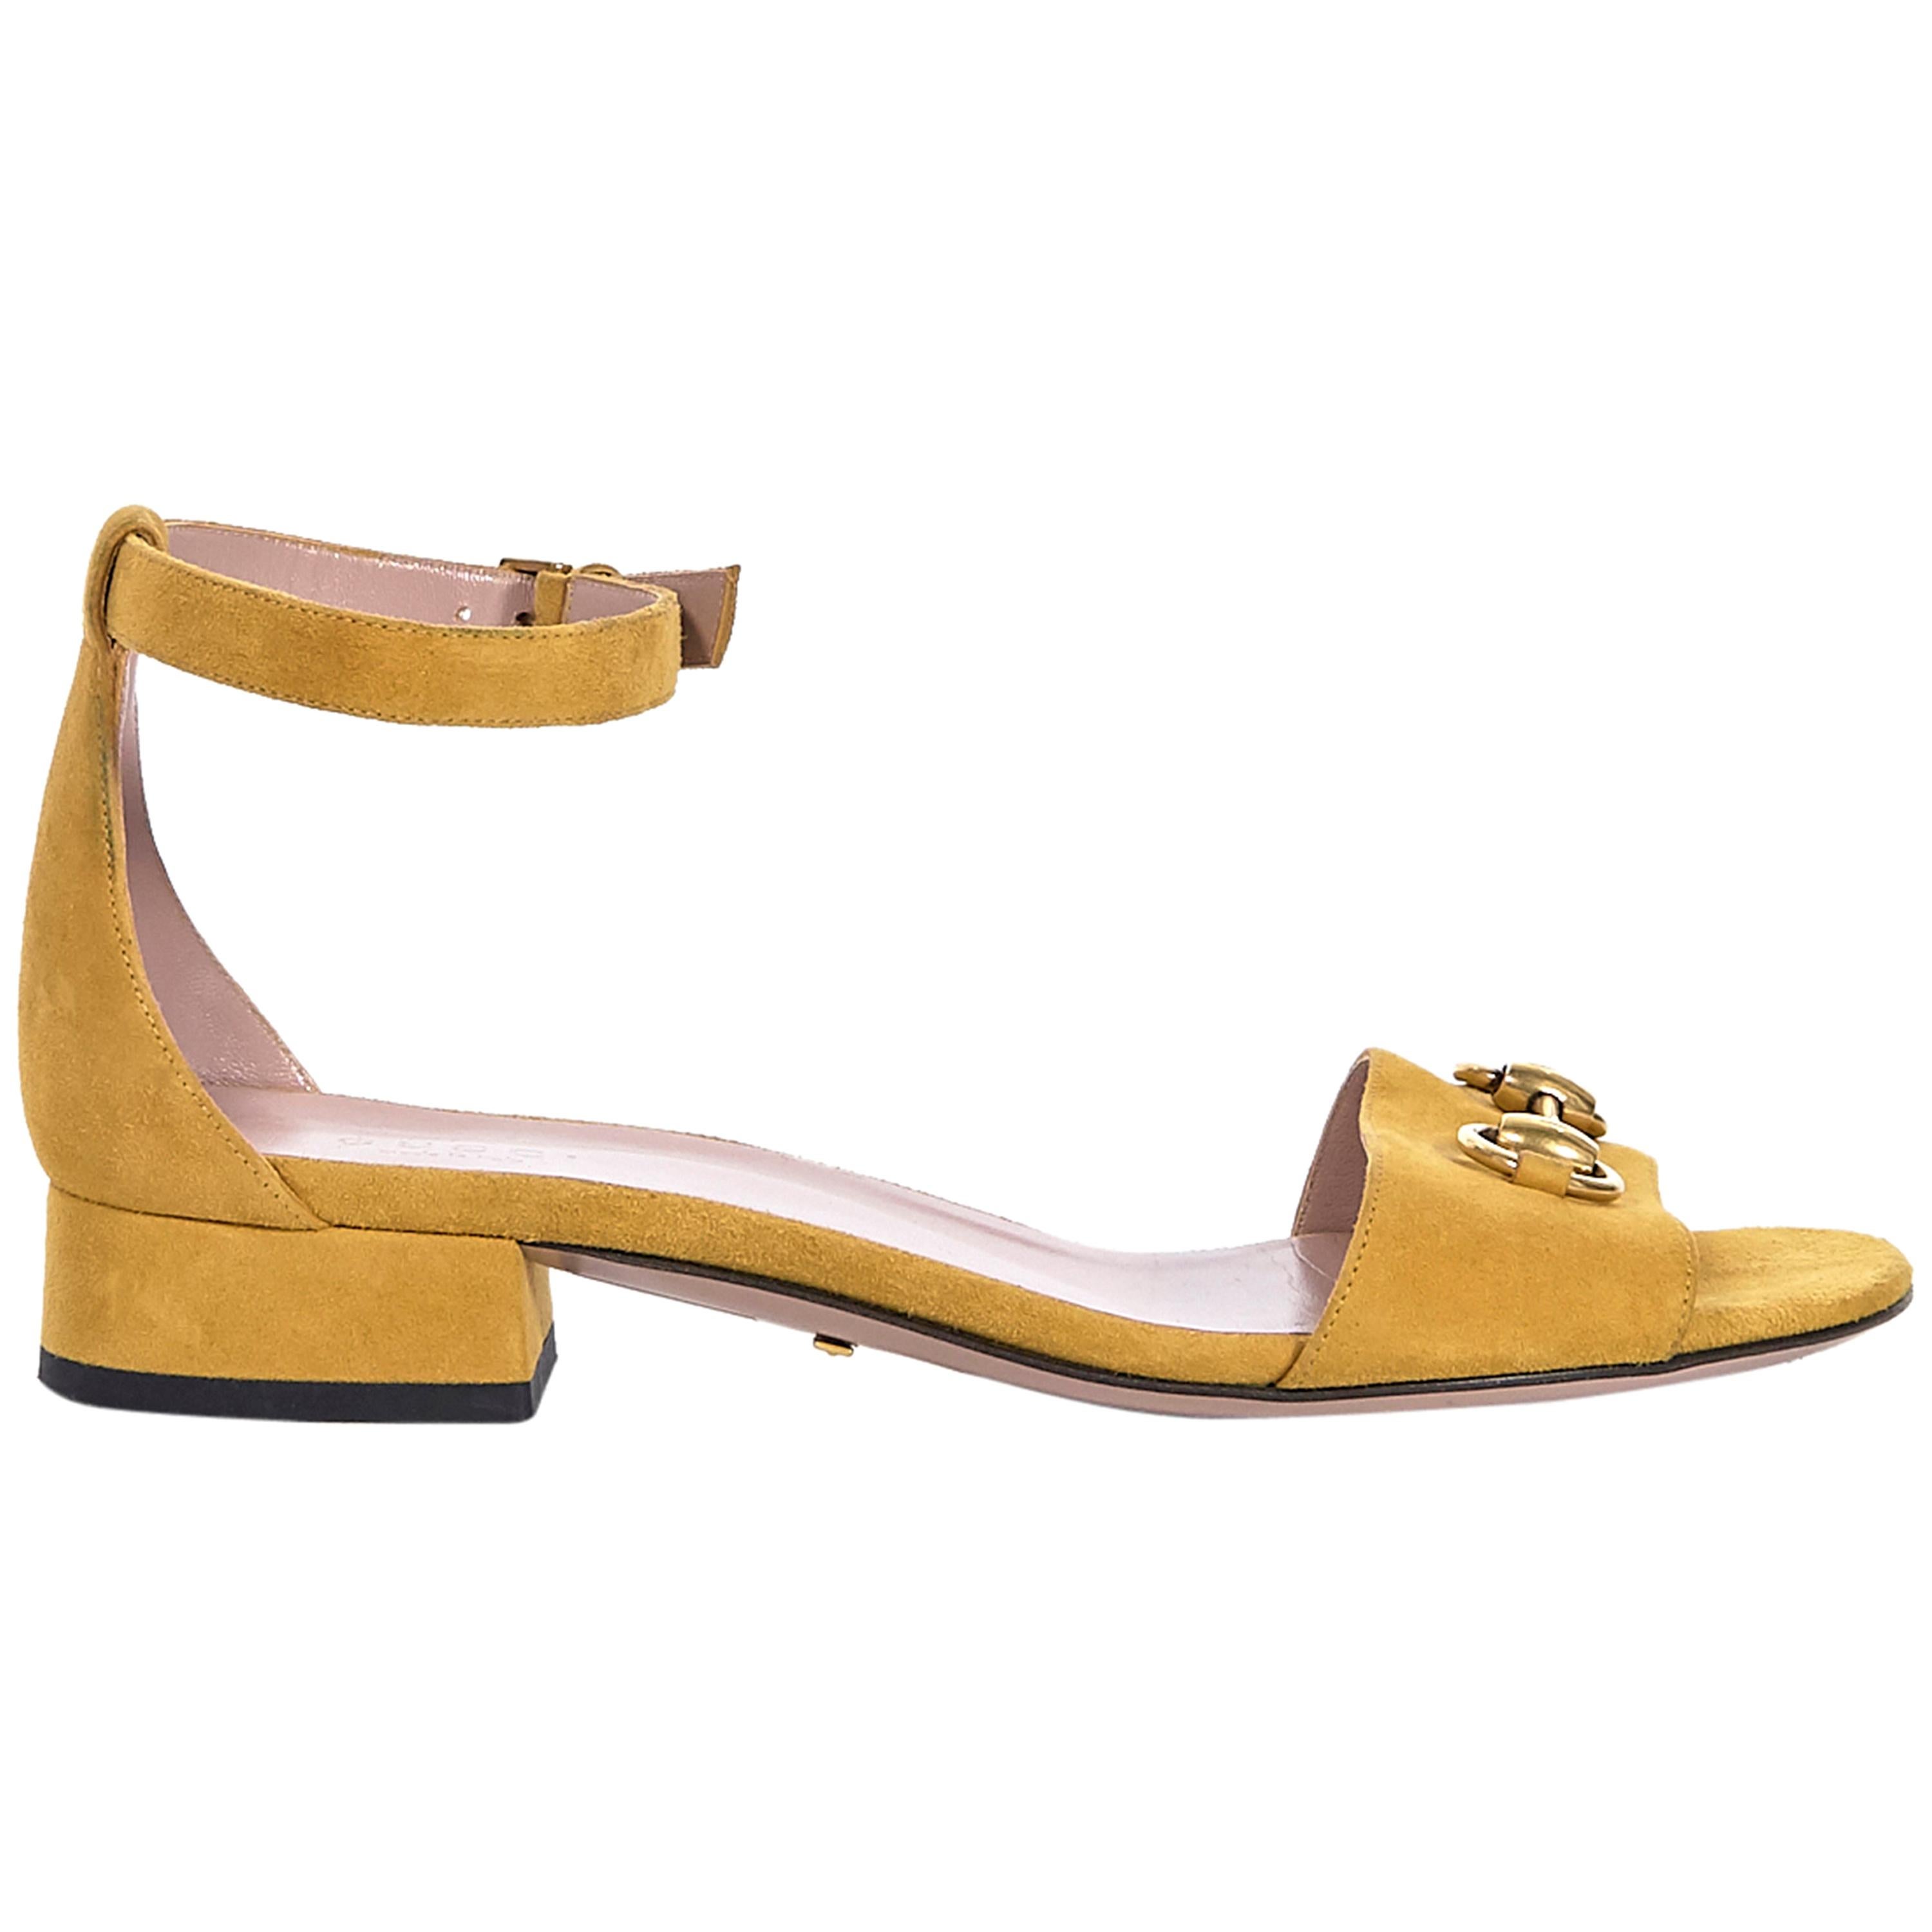 Gucci Mustard Yellow Suede Flat Sandals